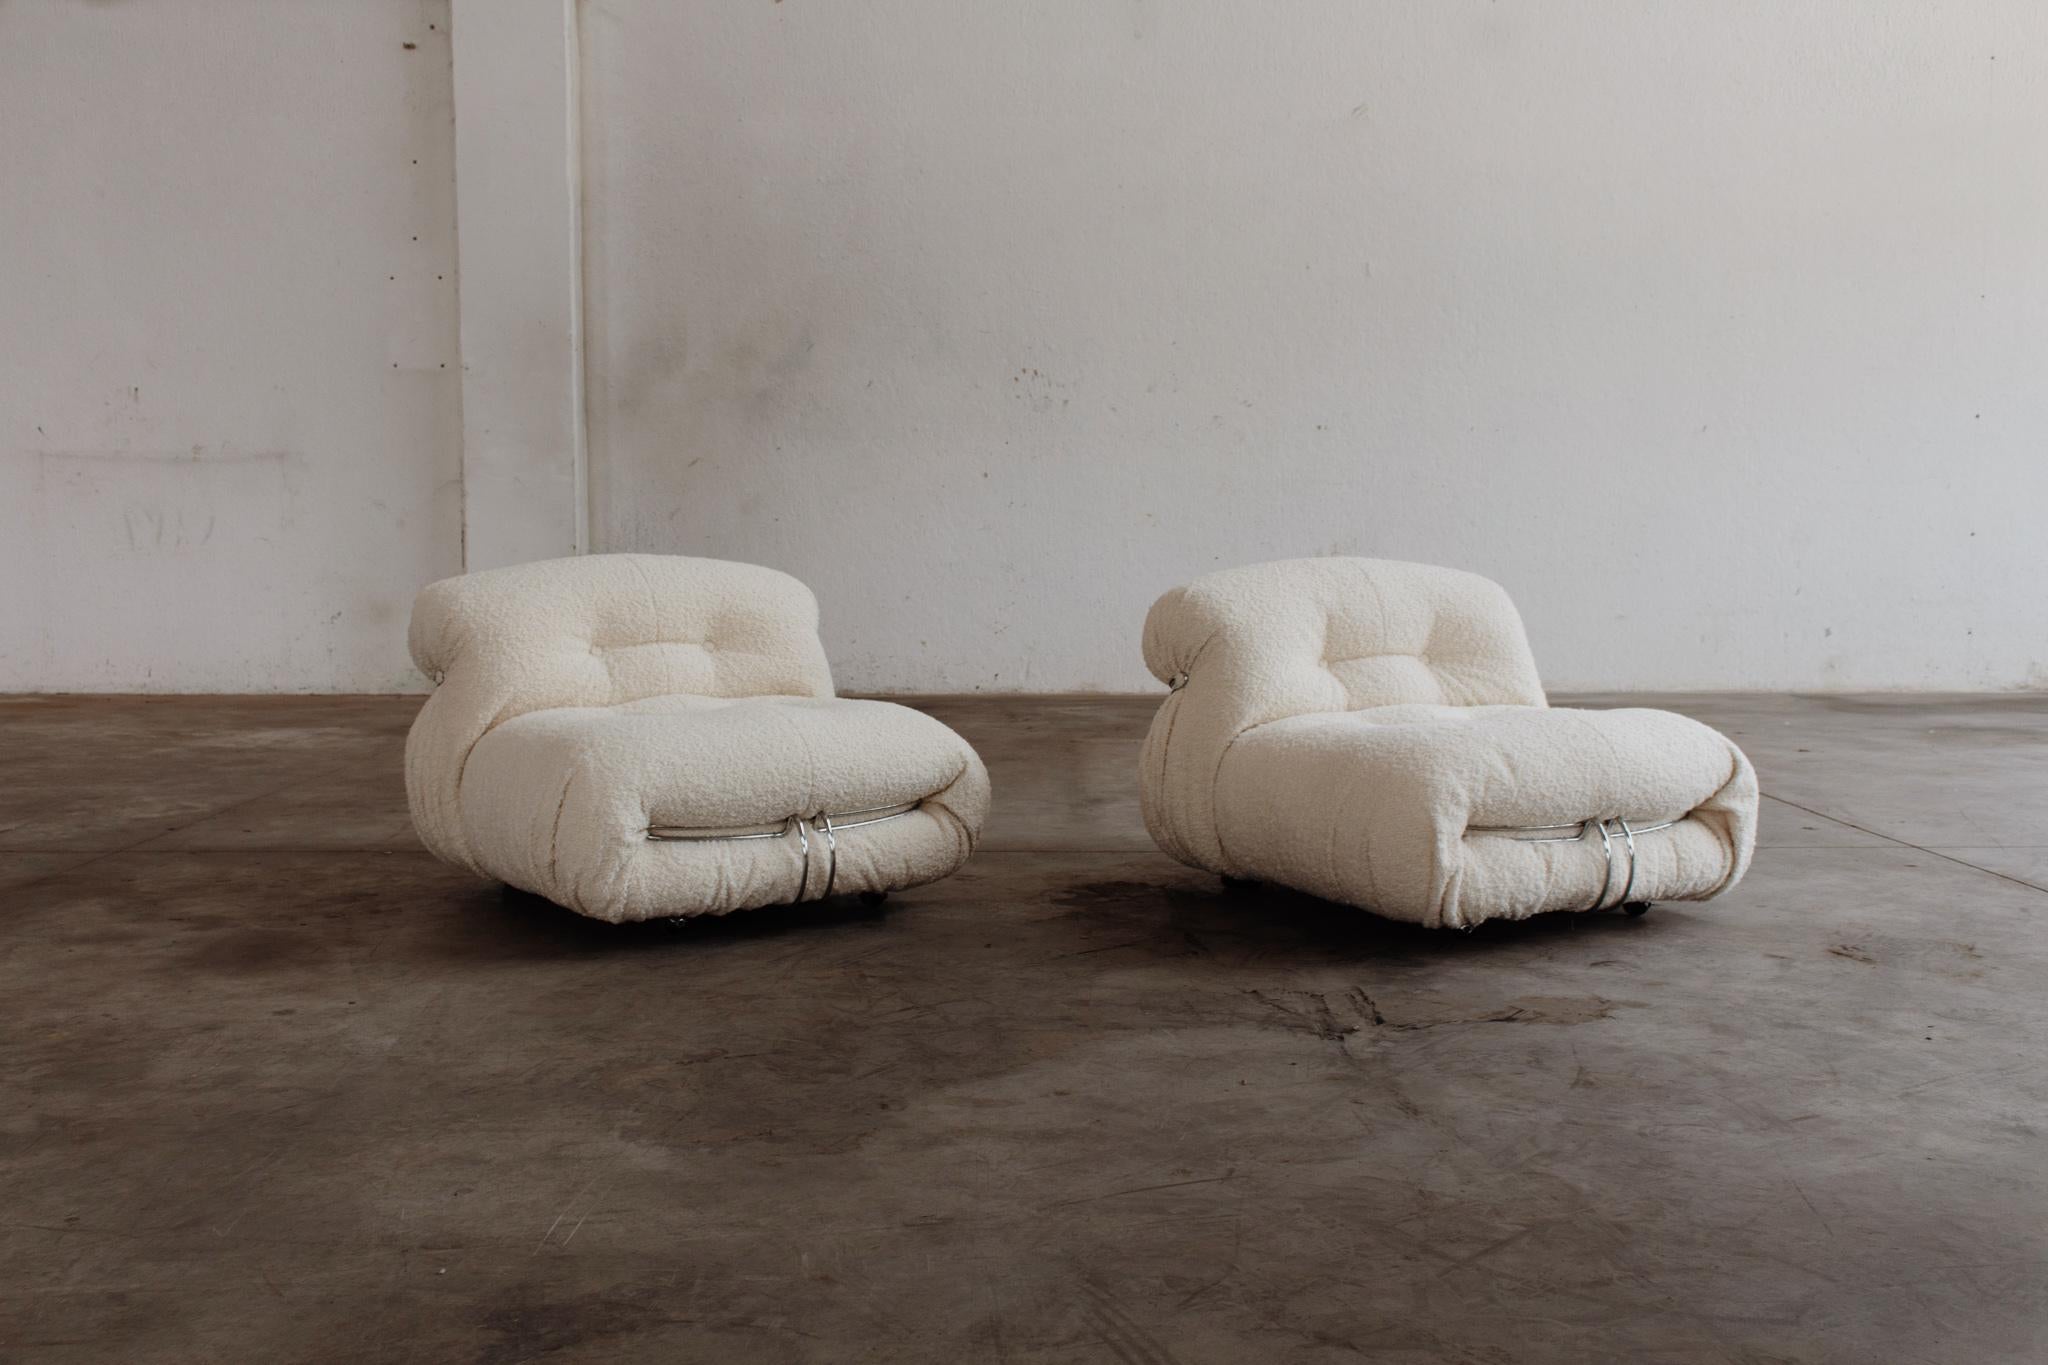 Afra & Tobia Scarpa “Soriana” lounge chairs for Cassina, bouclé wool and chromed steel, Italy, 1969, set of two.

Although technically designed in the 1960s, the 